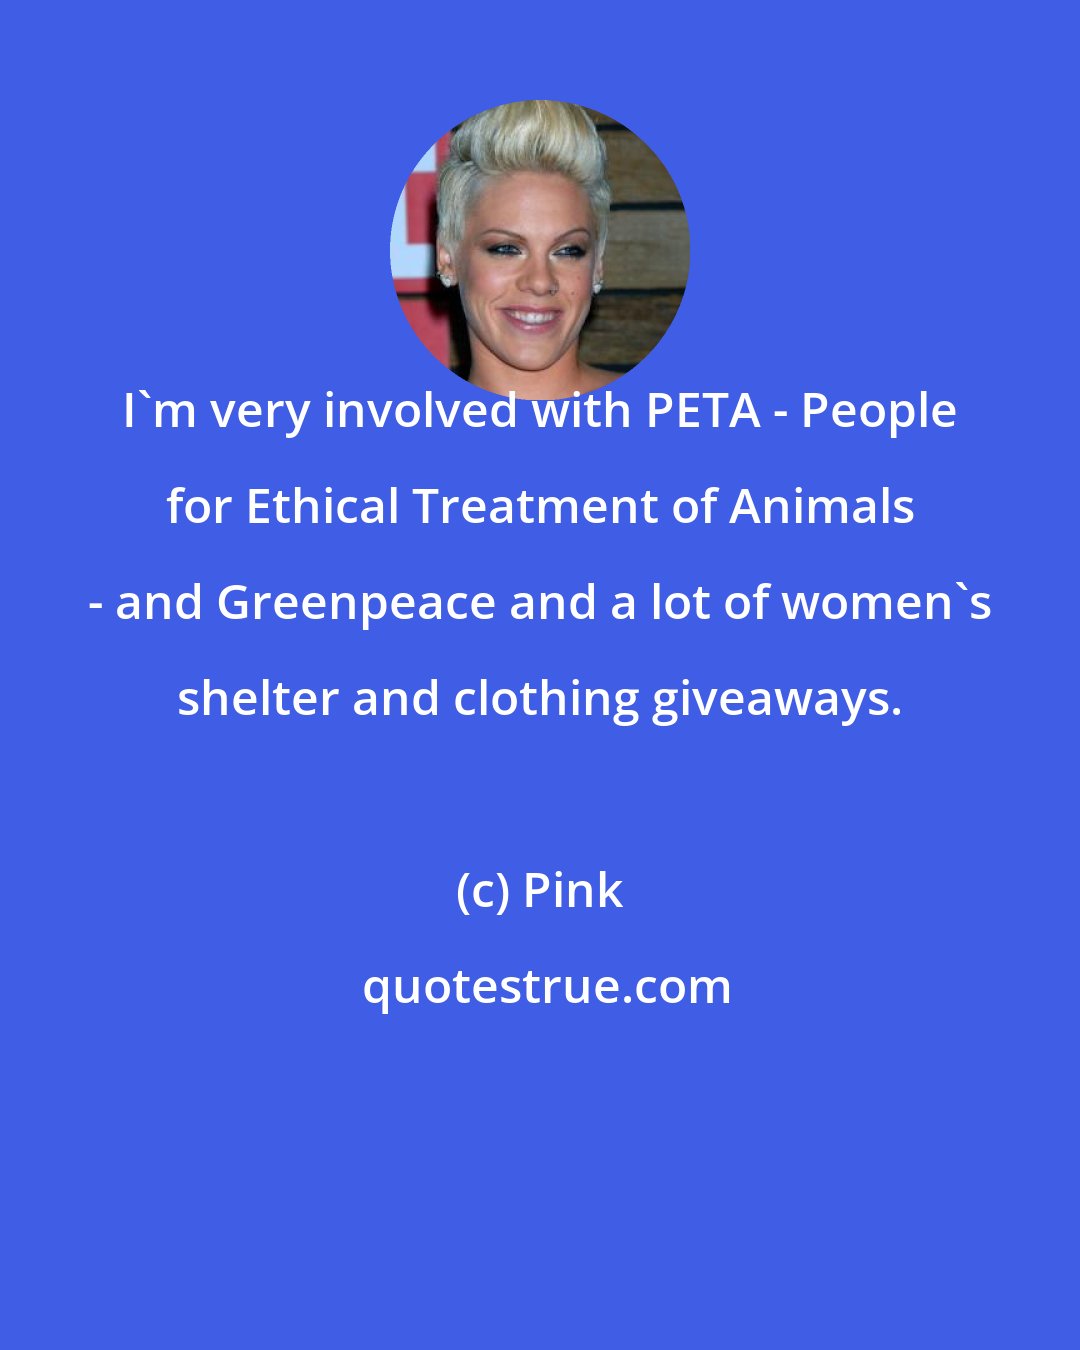 Pink: I'm very involved with PETA - People for Ethical Treatment of Animals - and Greenpeace and a lot of women's shelter and clothing giveaways.